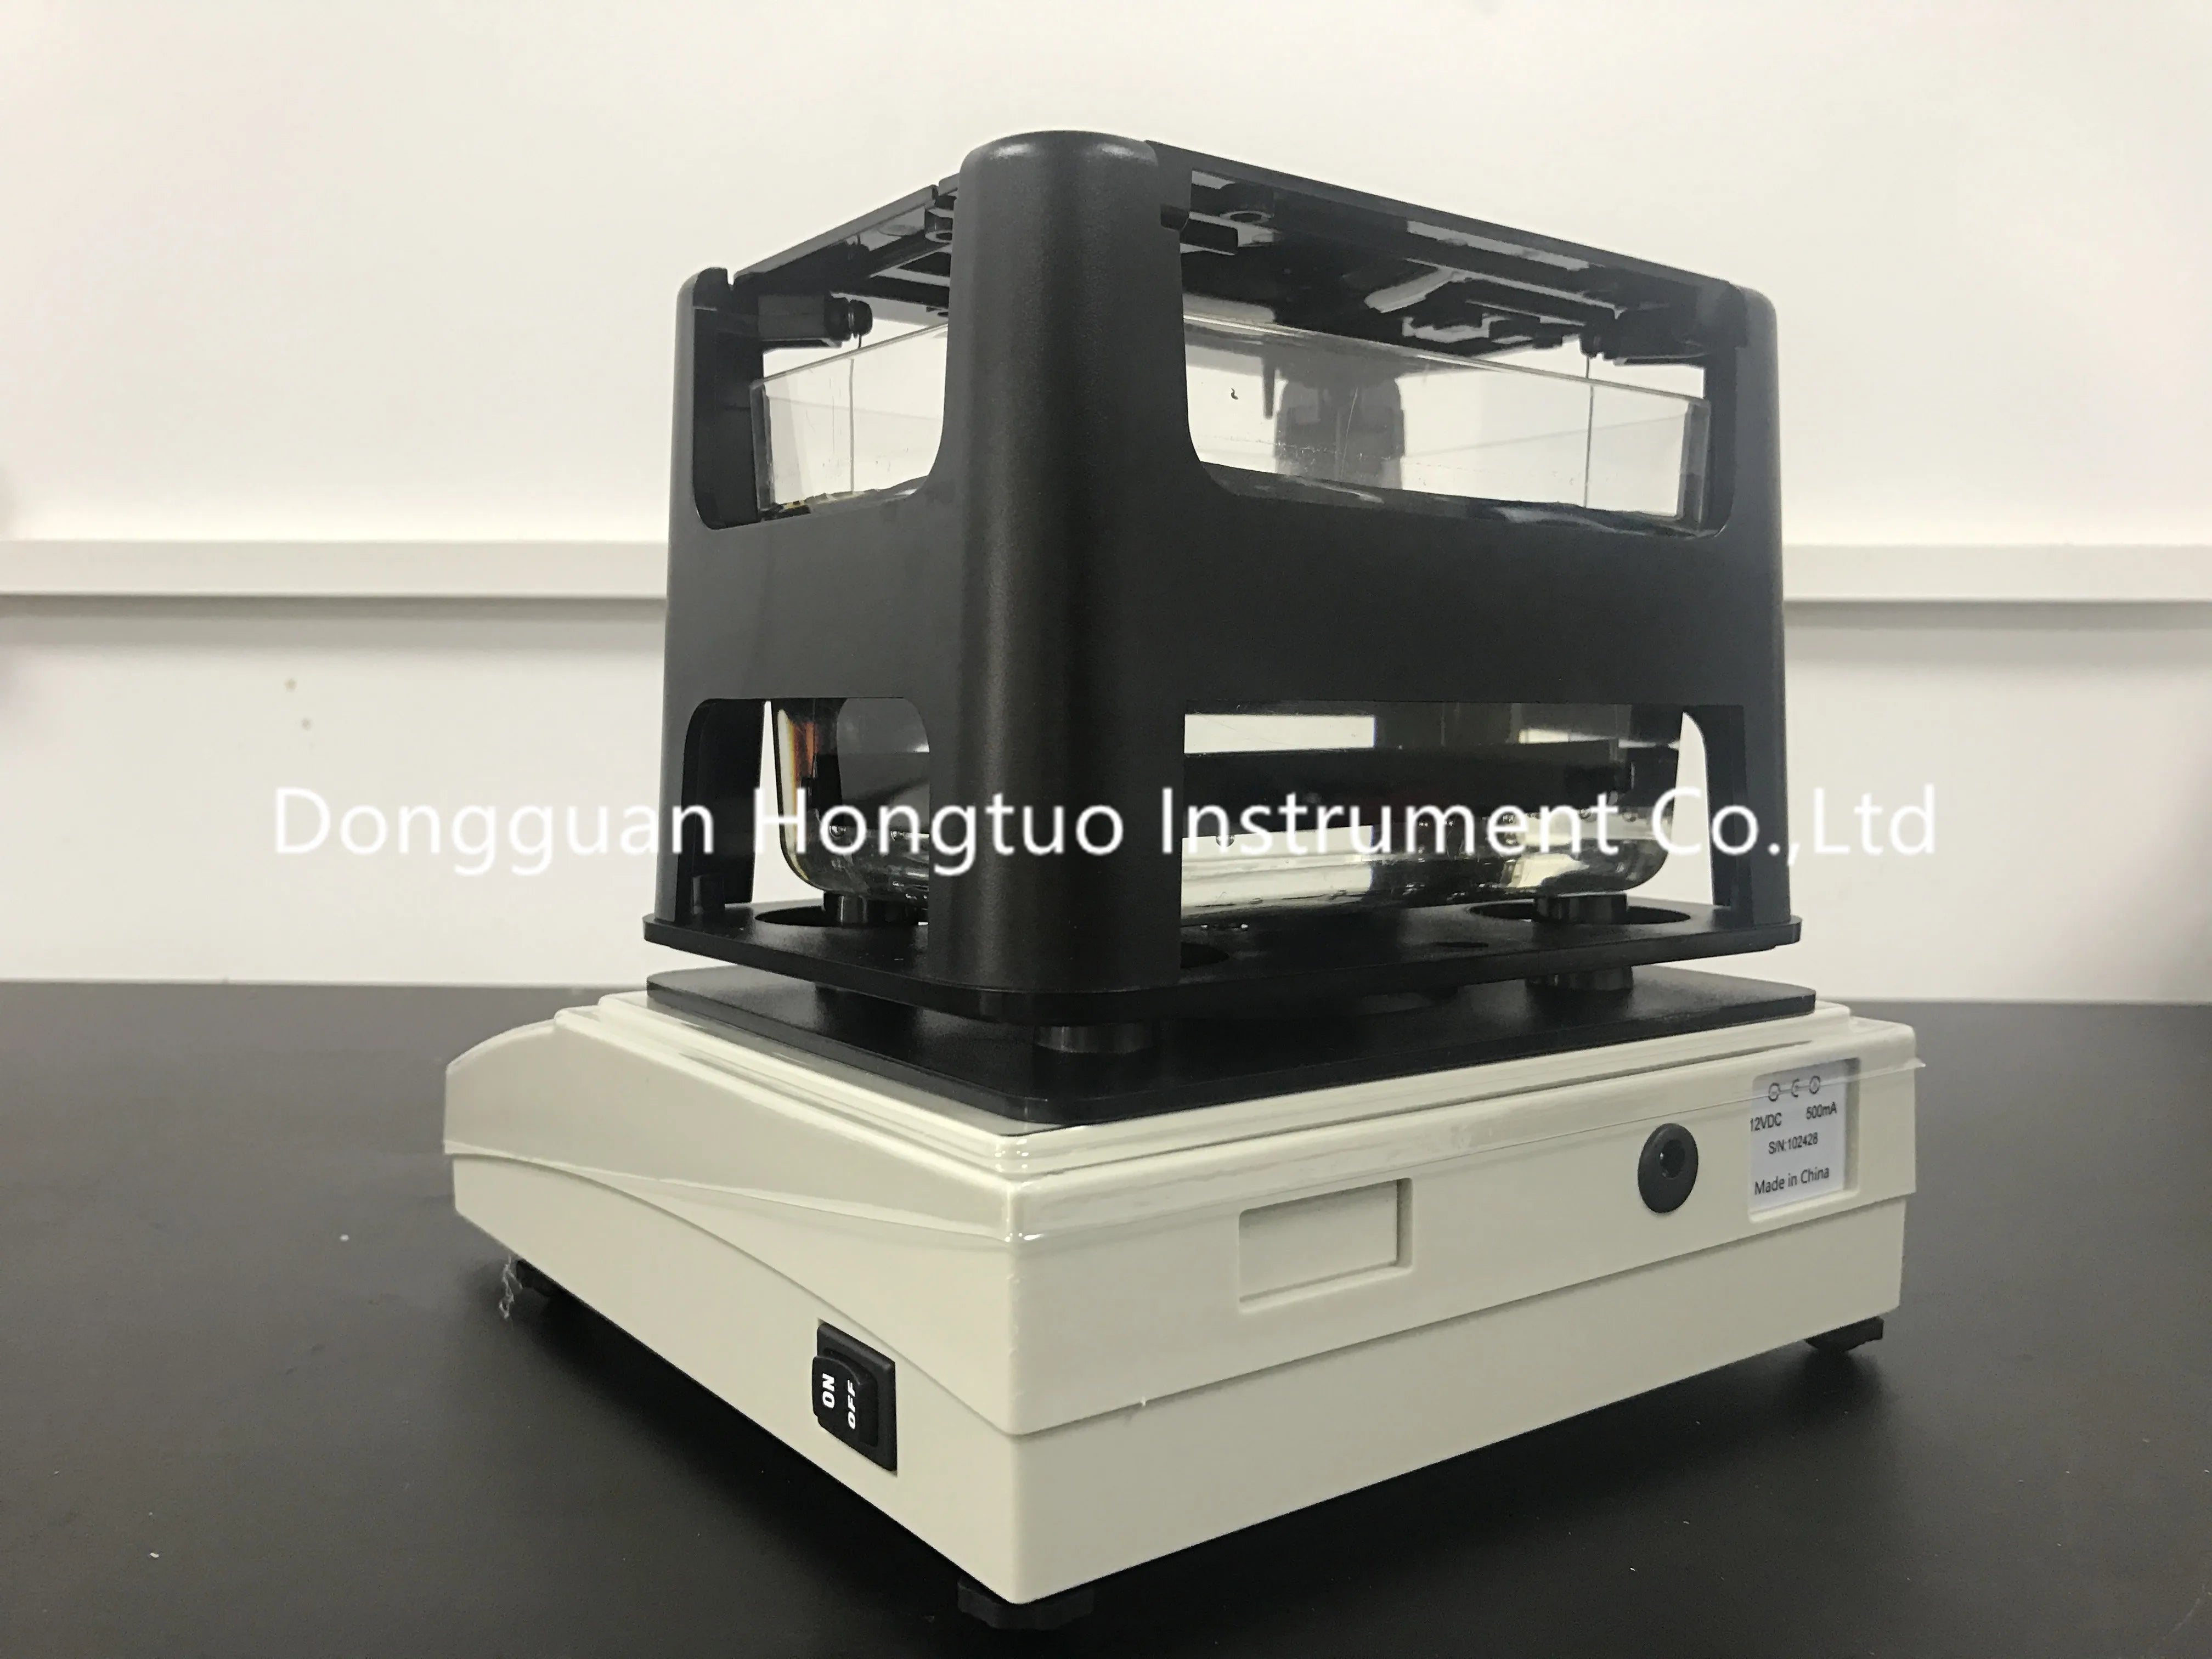 DH-300 Digital Solid Density Meter Tester With 0.005~300g Weight RS232 Interface Densitometer Testing Machine